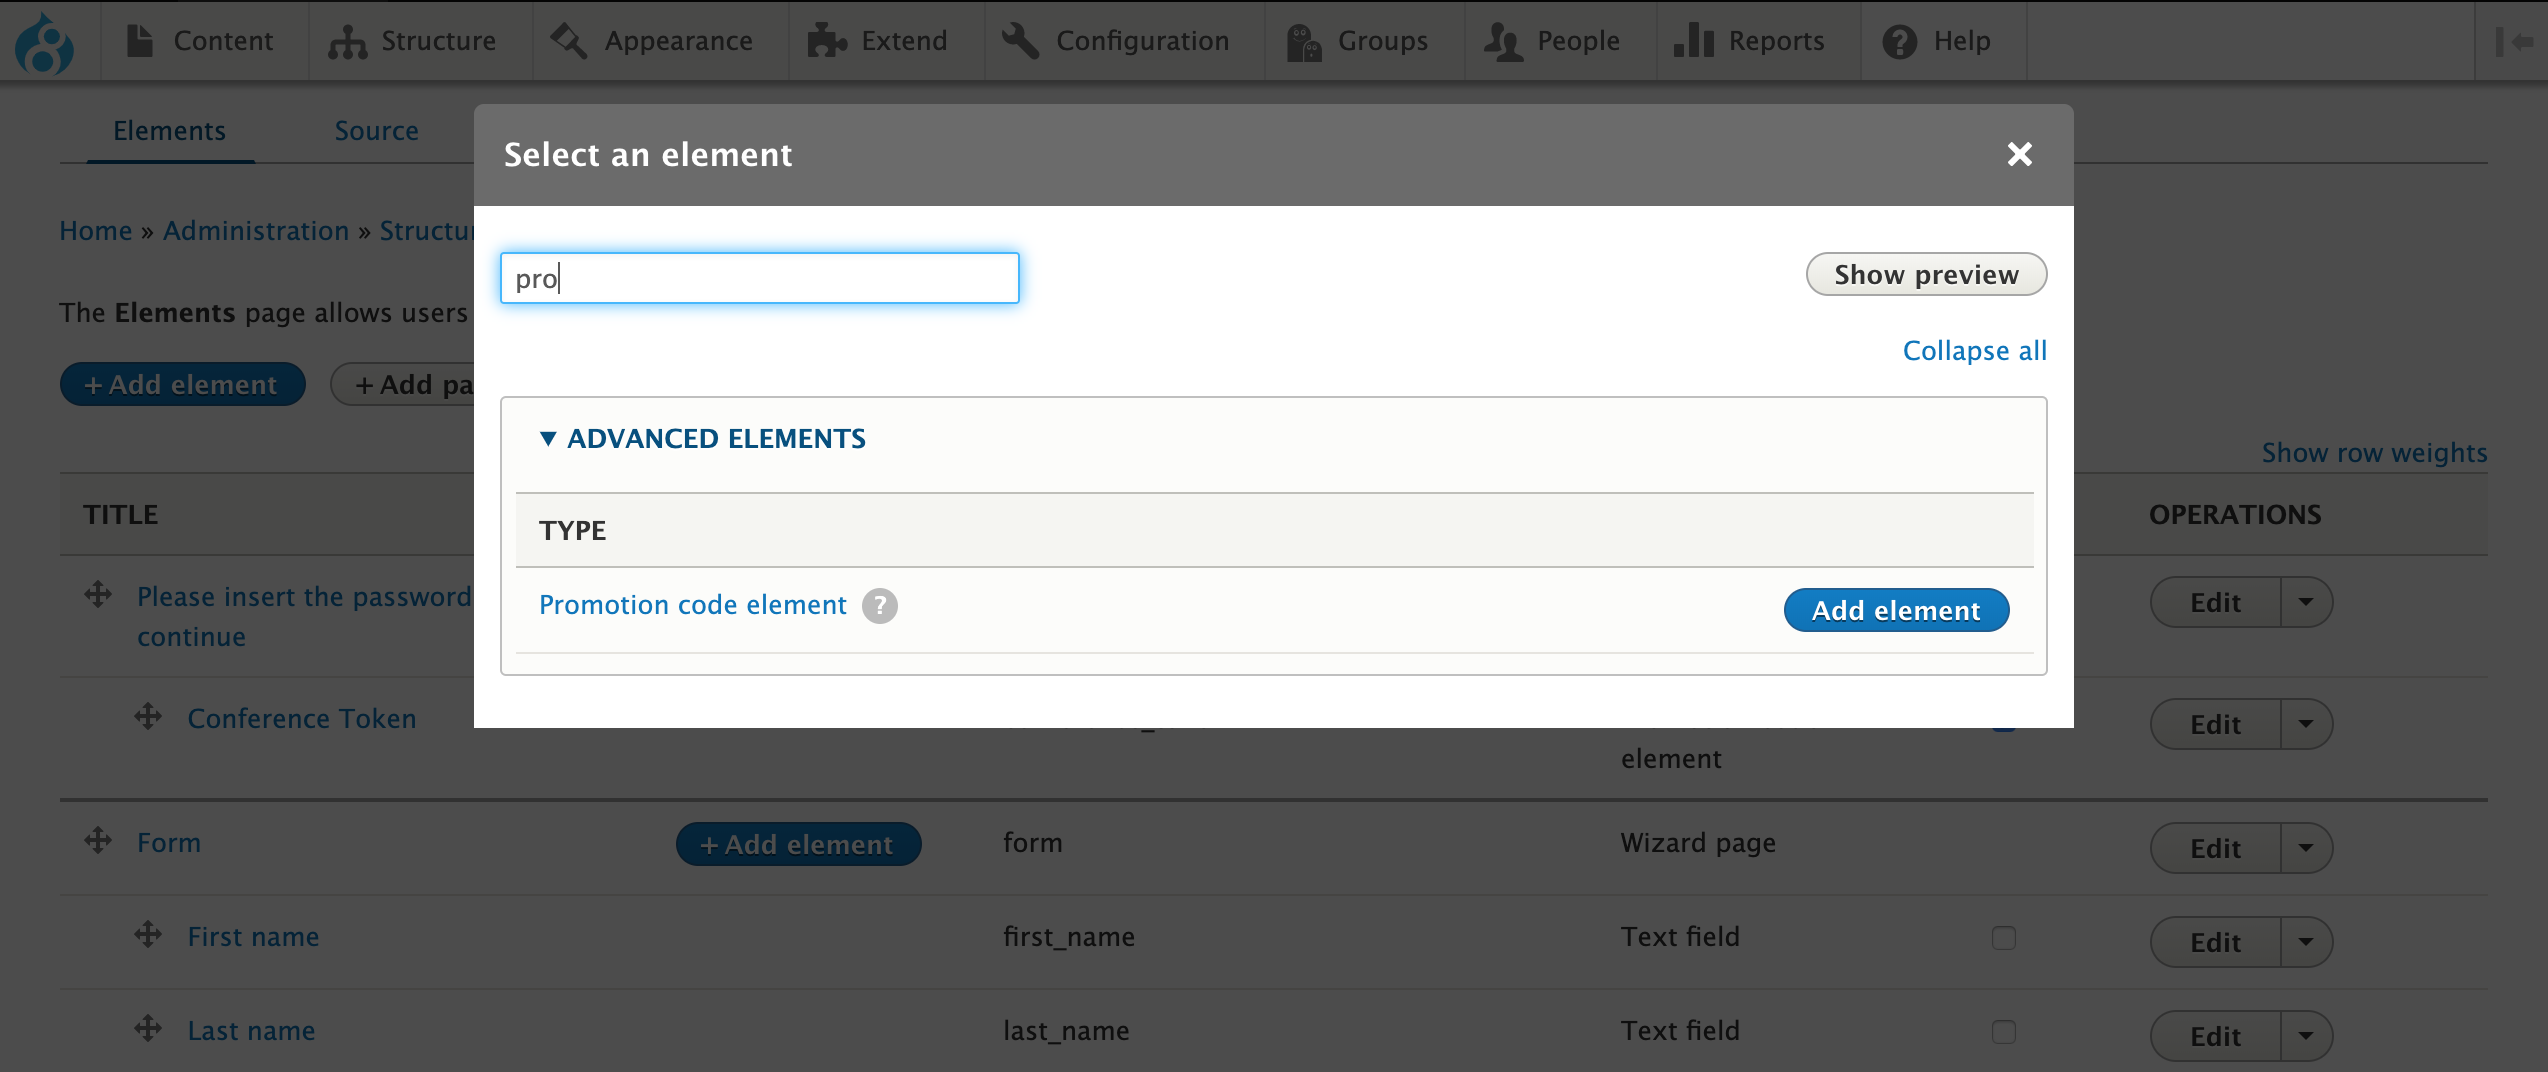 Add a new element to the Webform